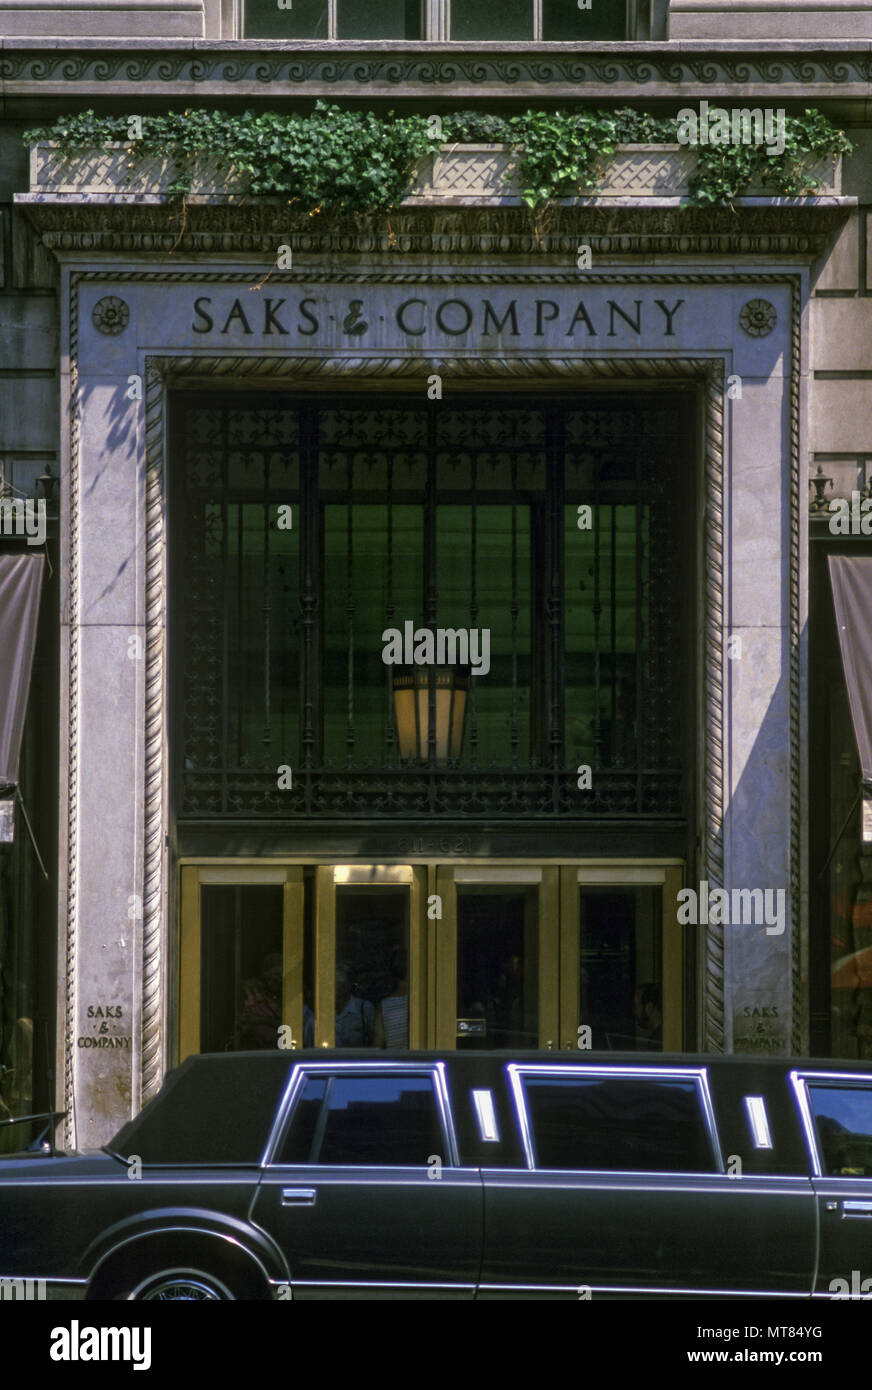 1988 HISTORICAL LINCOLN TOWN CAR (©FORD MOTOR CO 1987) SAKS COMPANY DEPARTMENT STORE FIFTH AVENUE MANHATTAN NEW YORK CITY USA Stock Photo